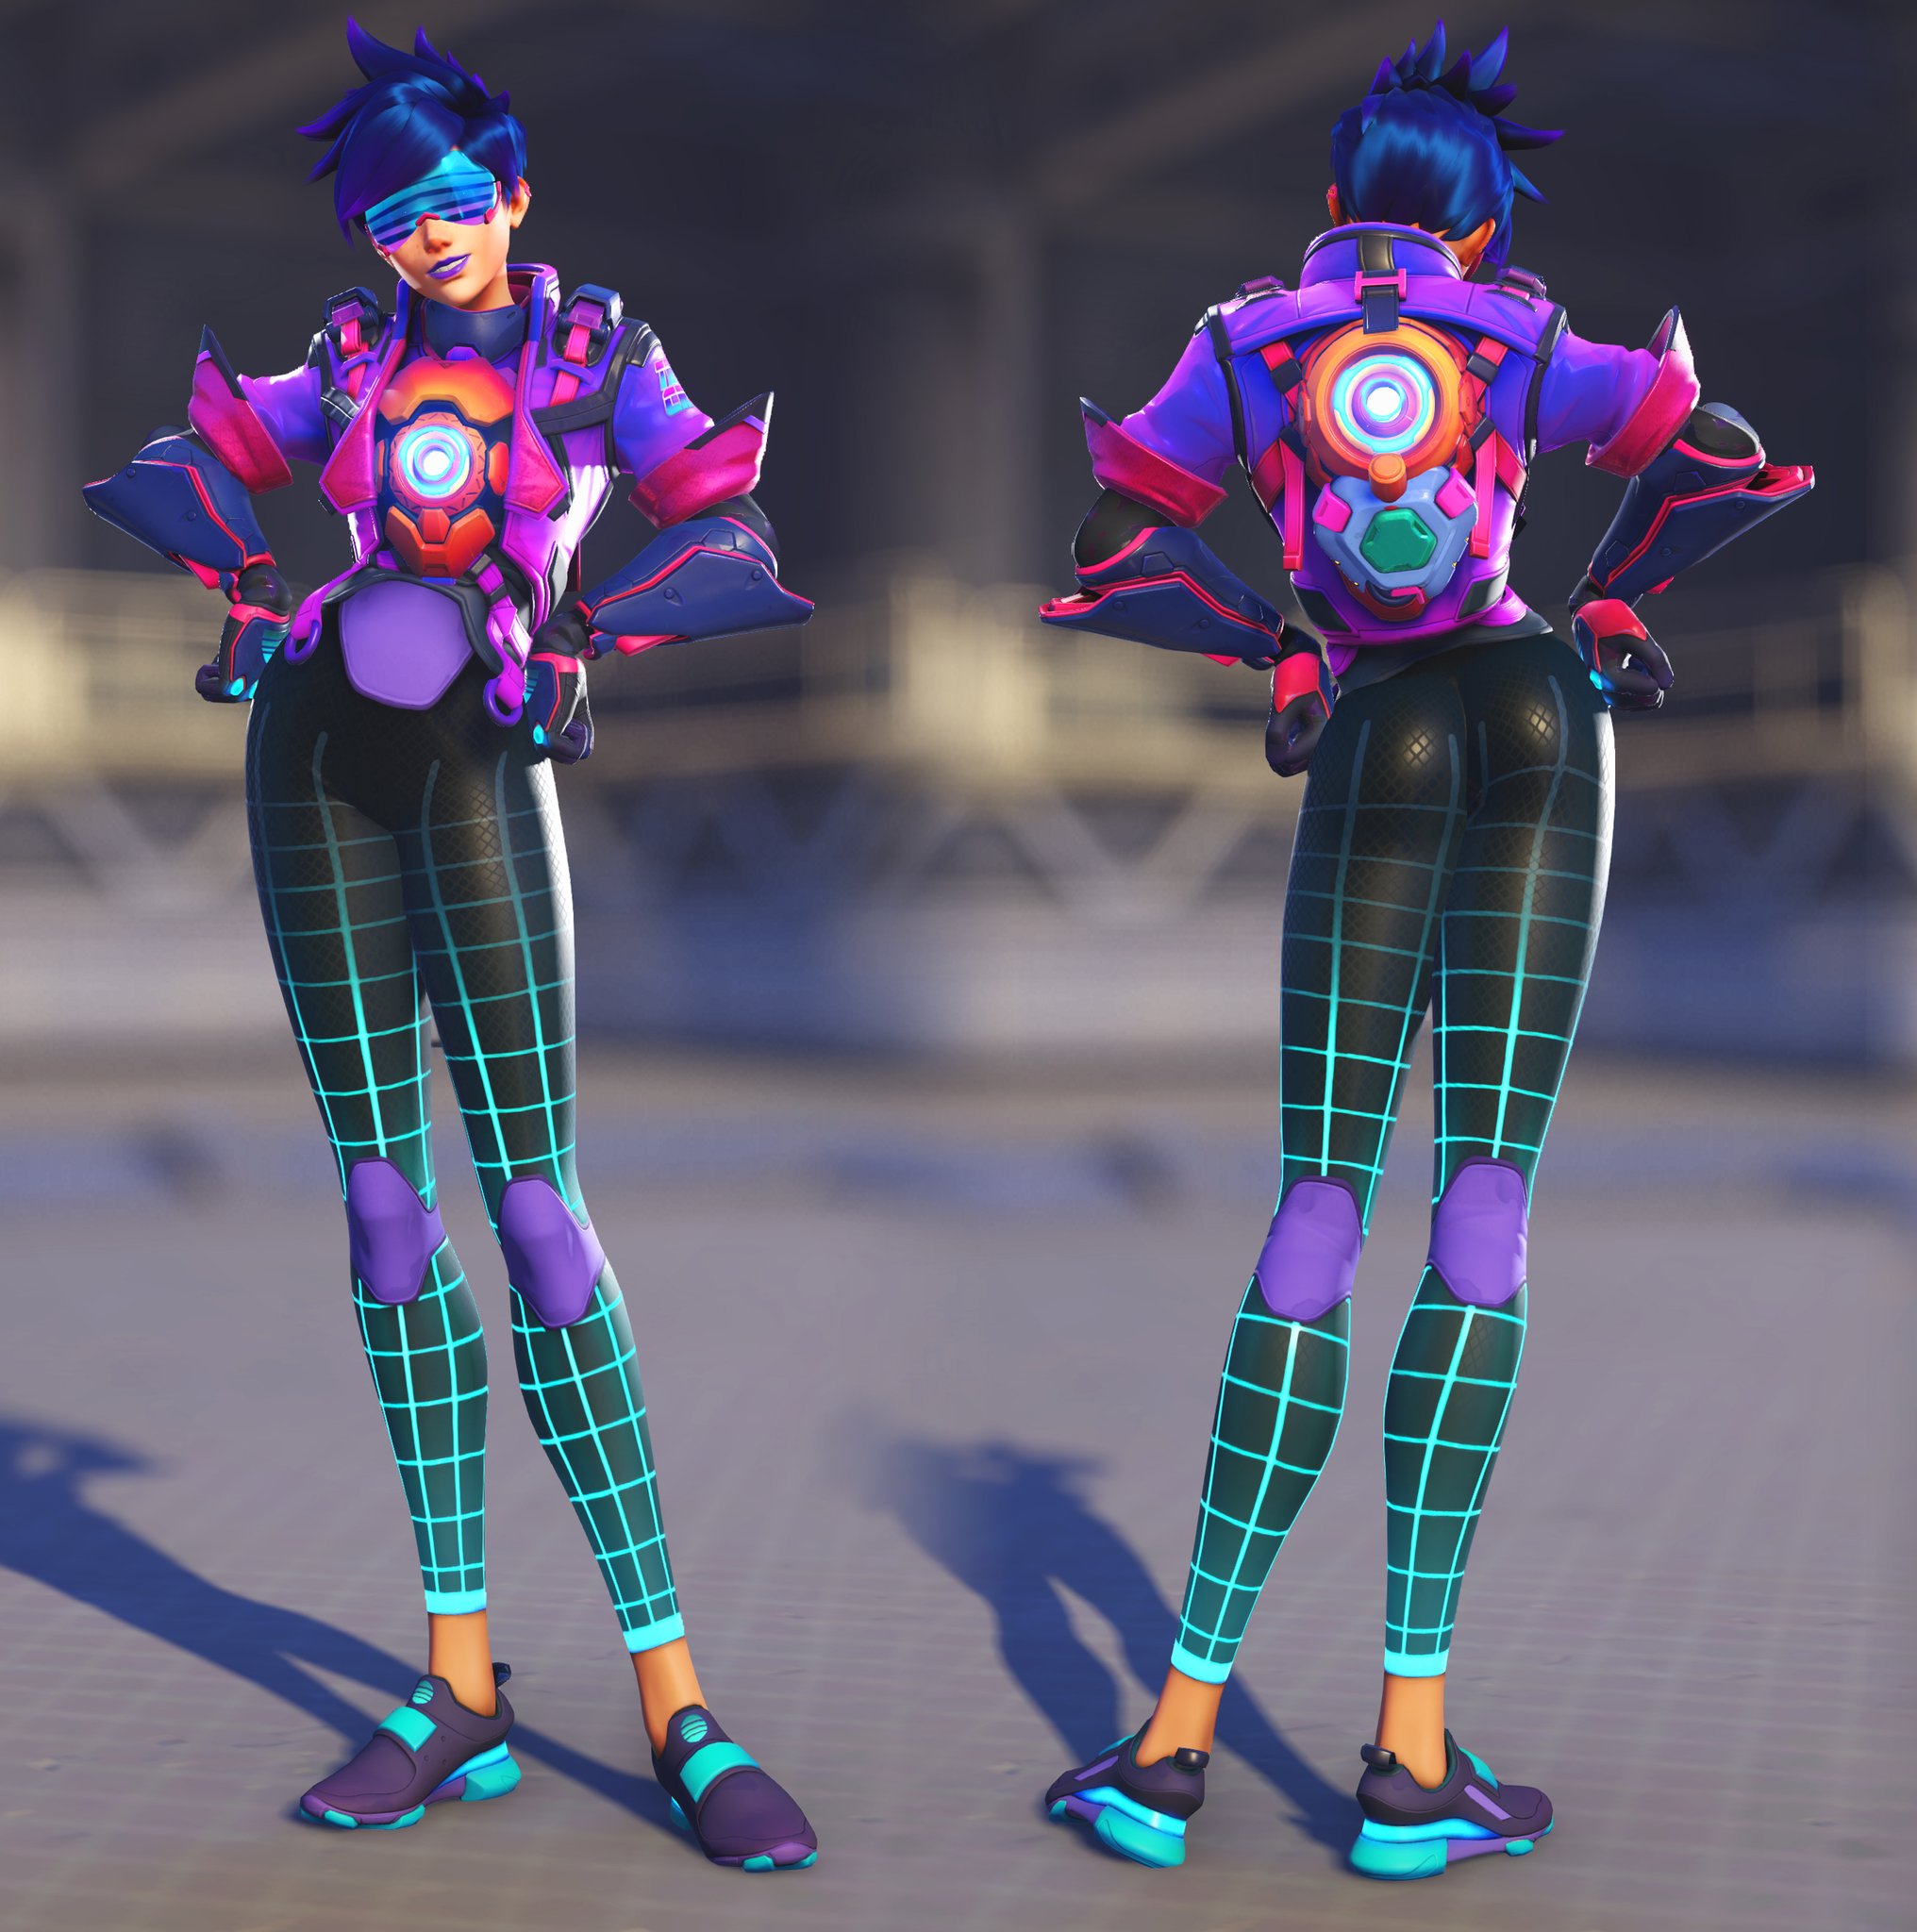 Overwatch Cavalry on X: Upcoming #Overwatch2 Epic Skin: Synthwave